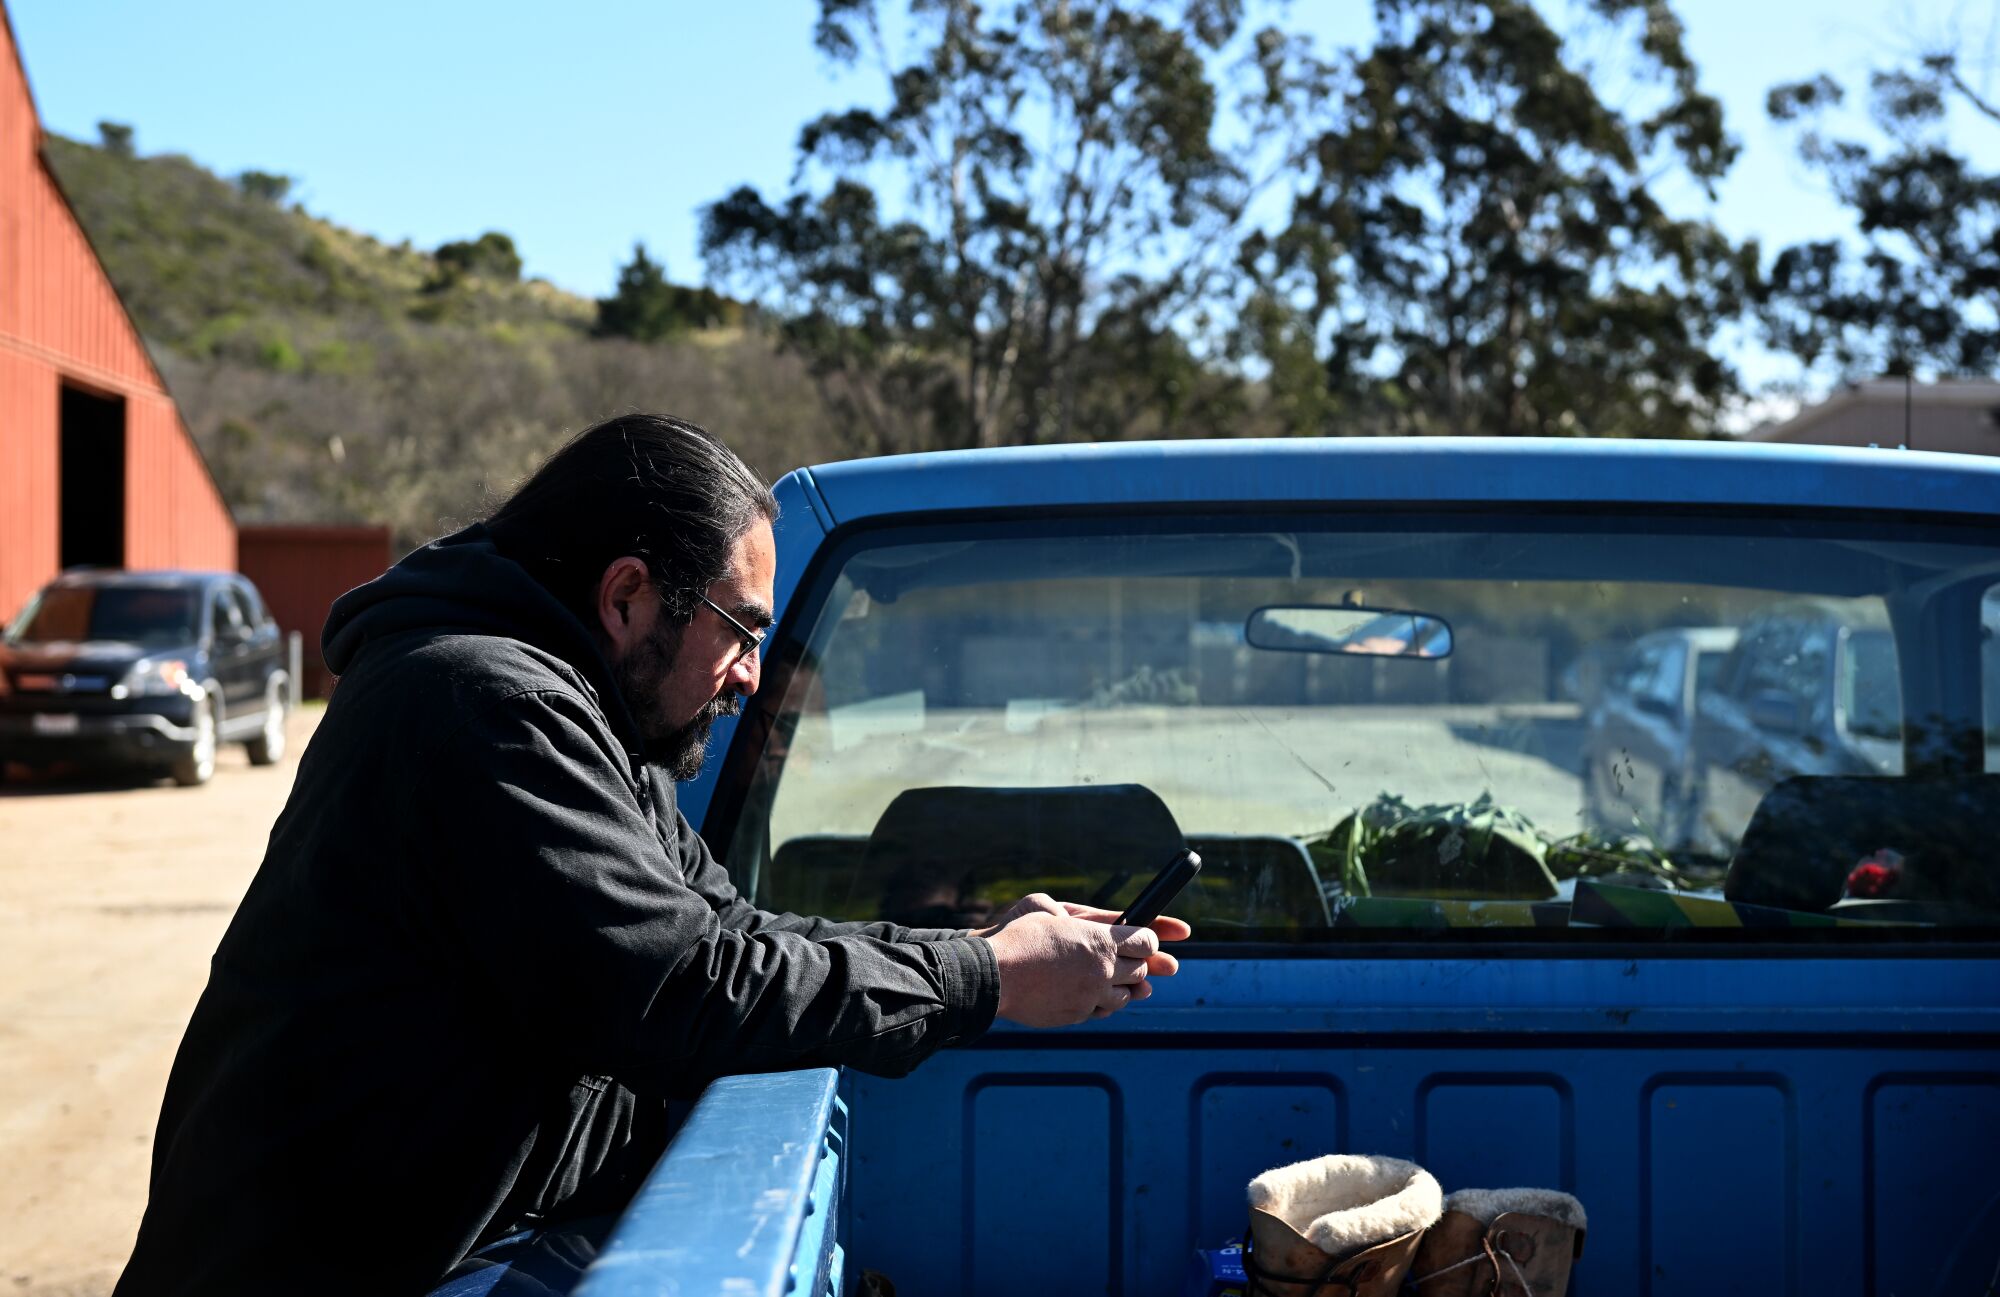 A man leans over the side of a blue pickup truck bed.